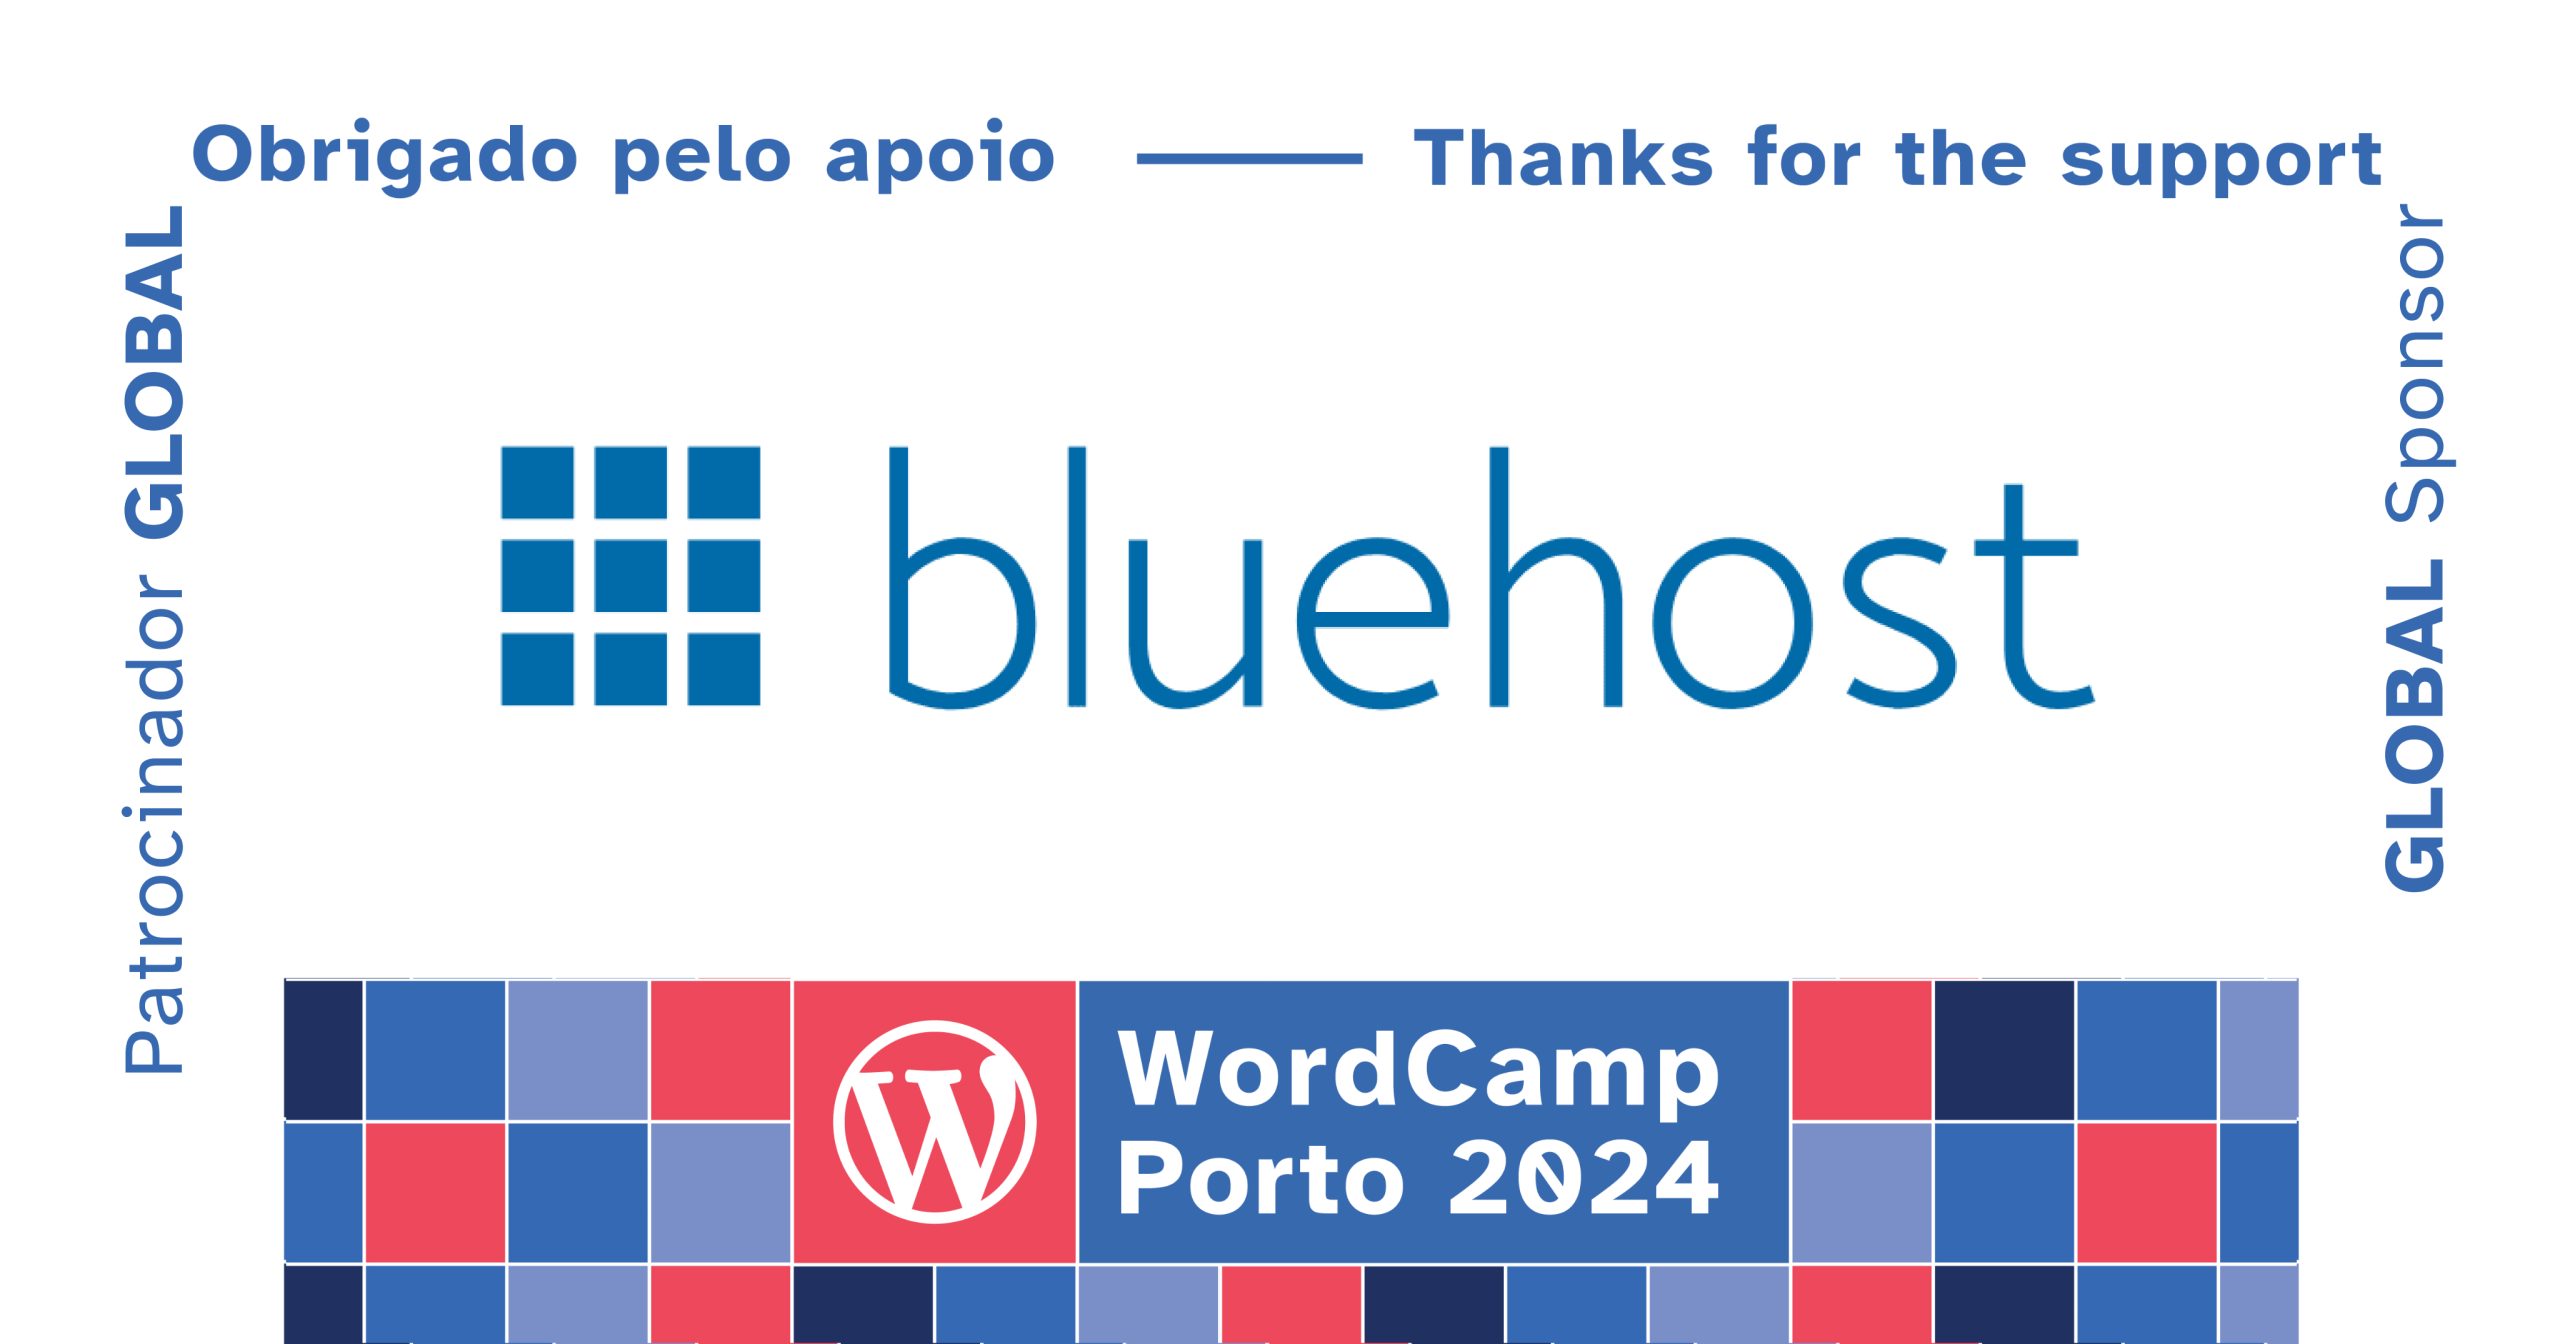 Thank you Bluehost